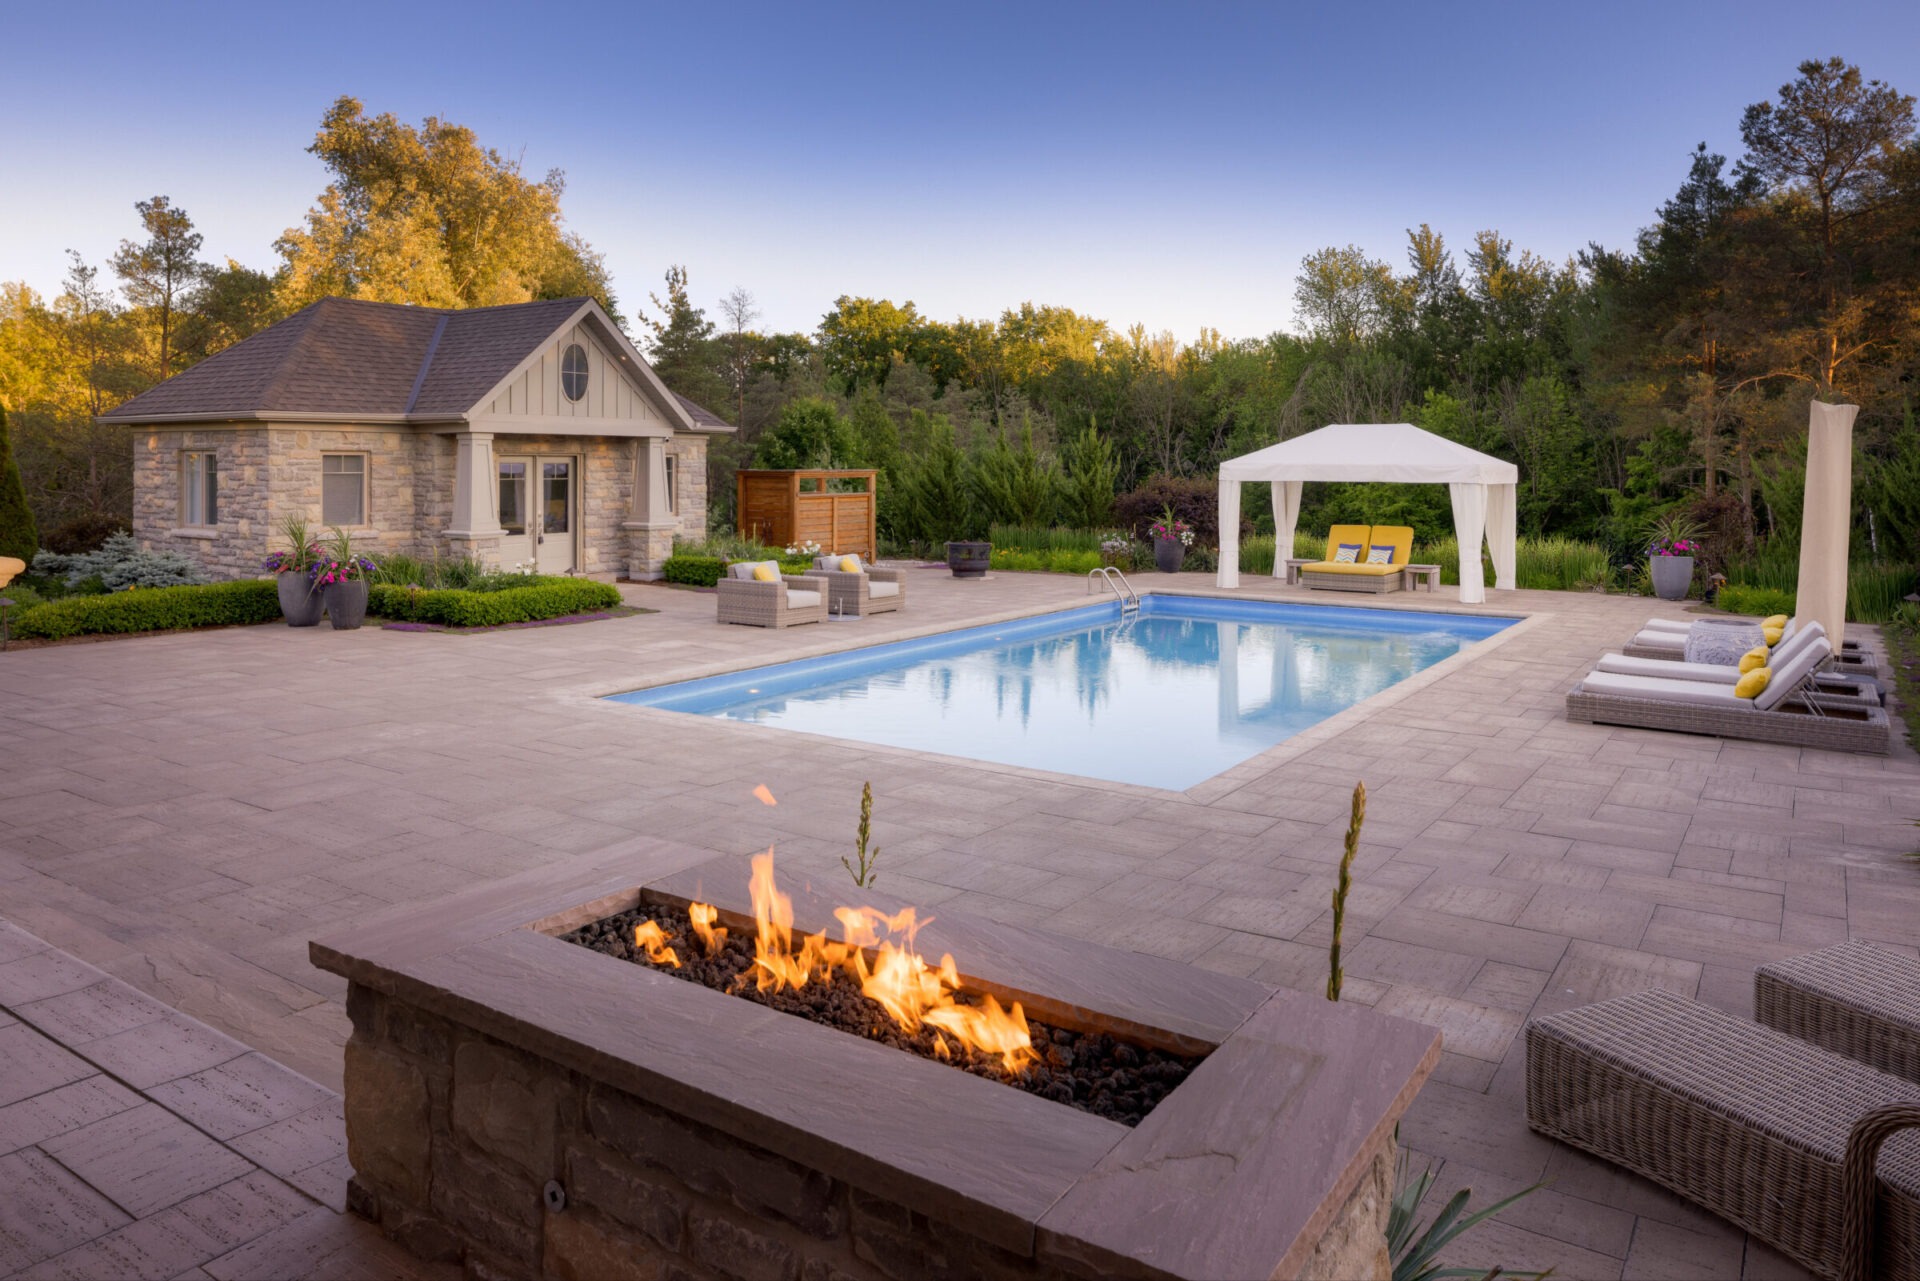 A luxurious backyard with a swimming pool, outdoor fire pit, patio furniture, a pergola, and a stone house surrounded by lush greenery during twilight.